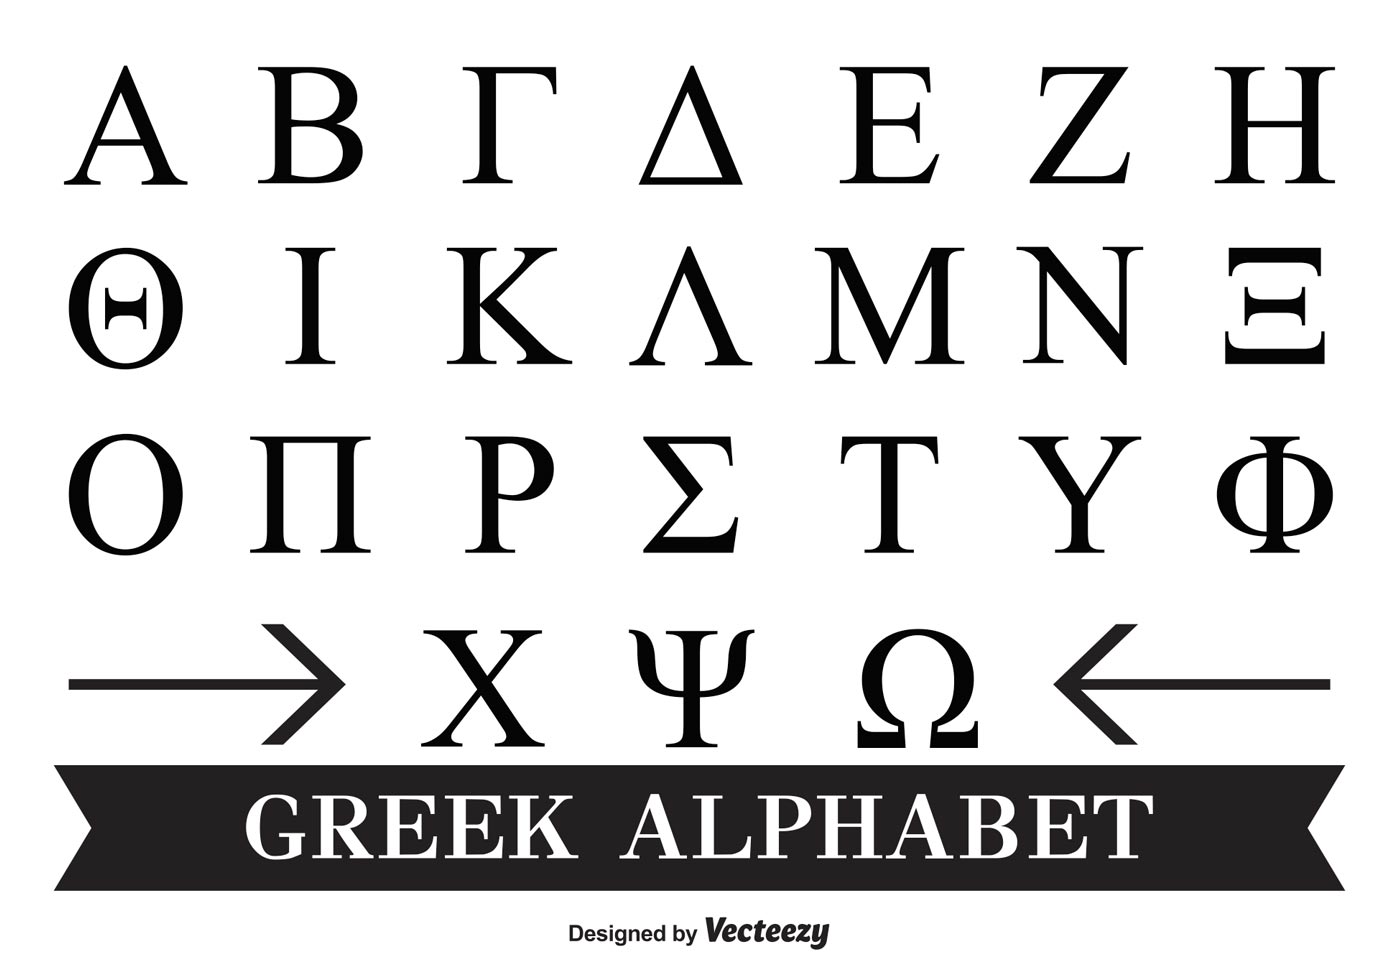 greek letters in old english font